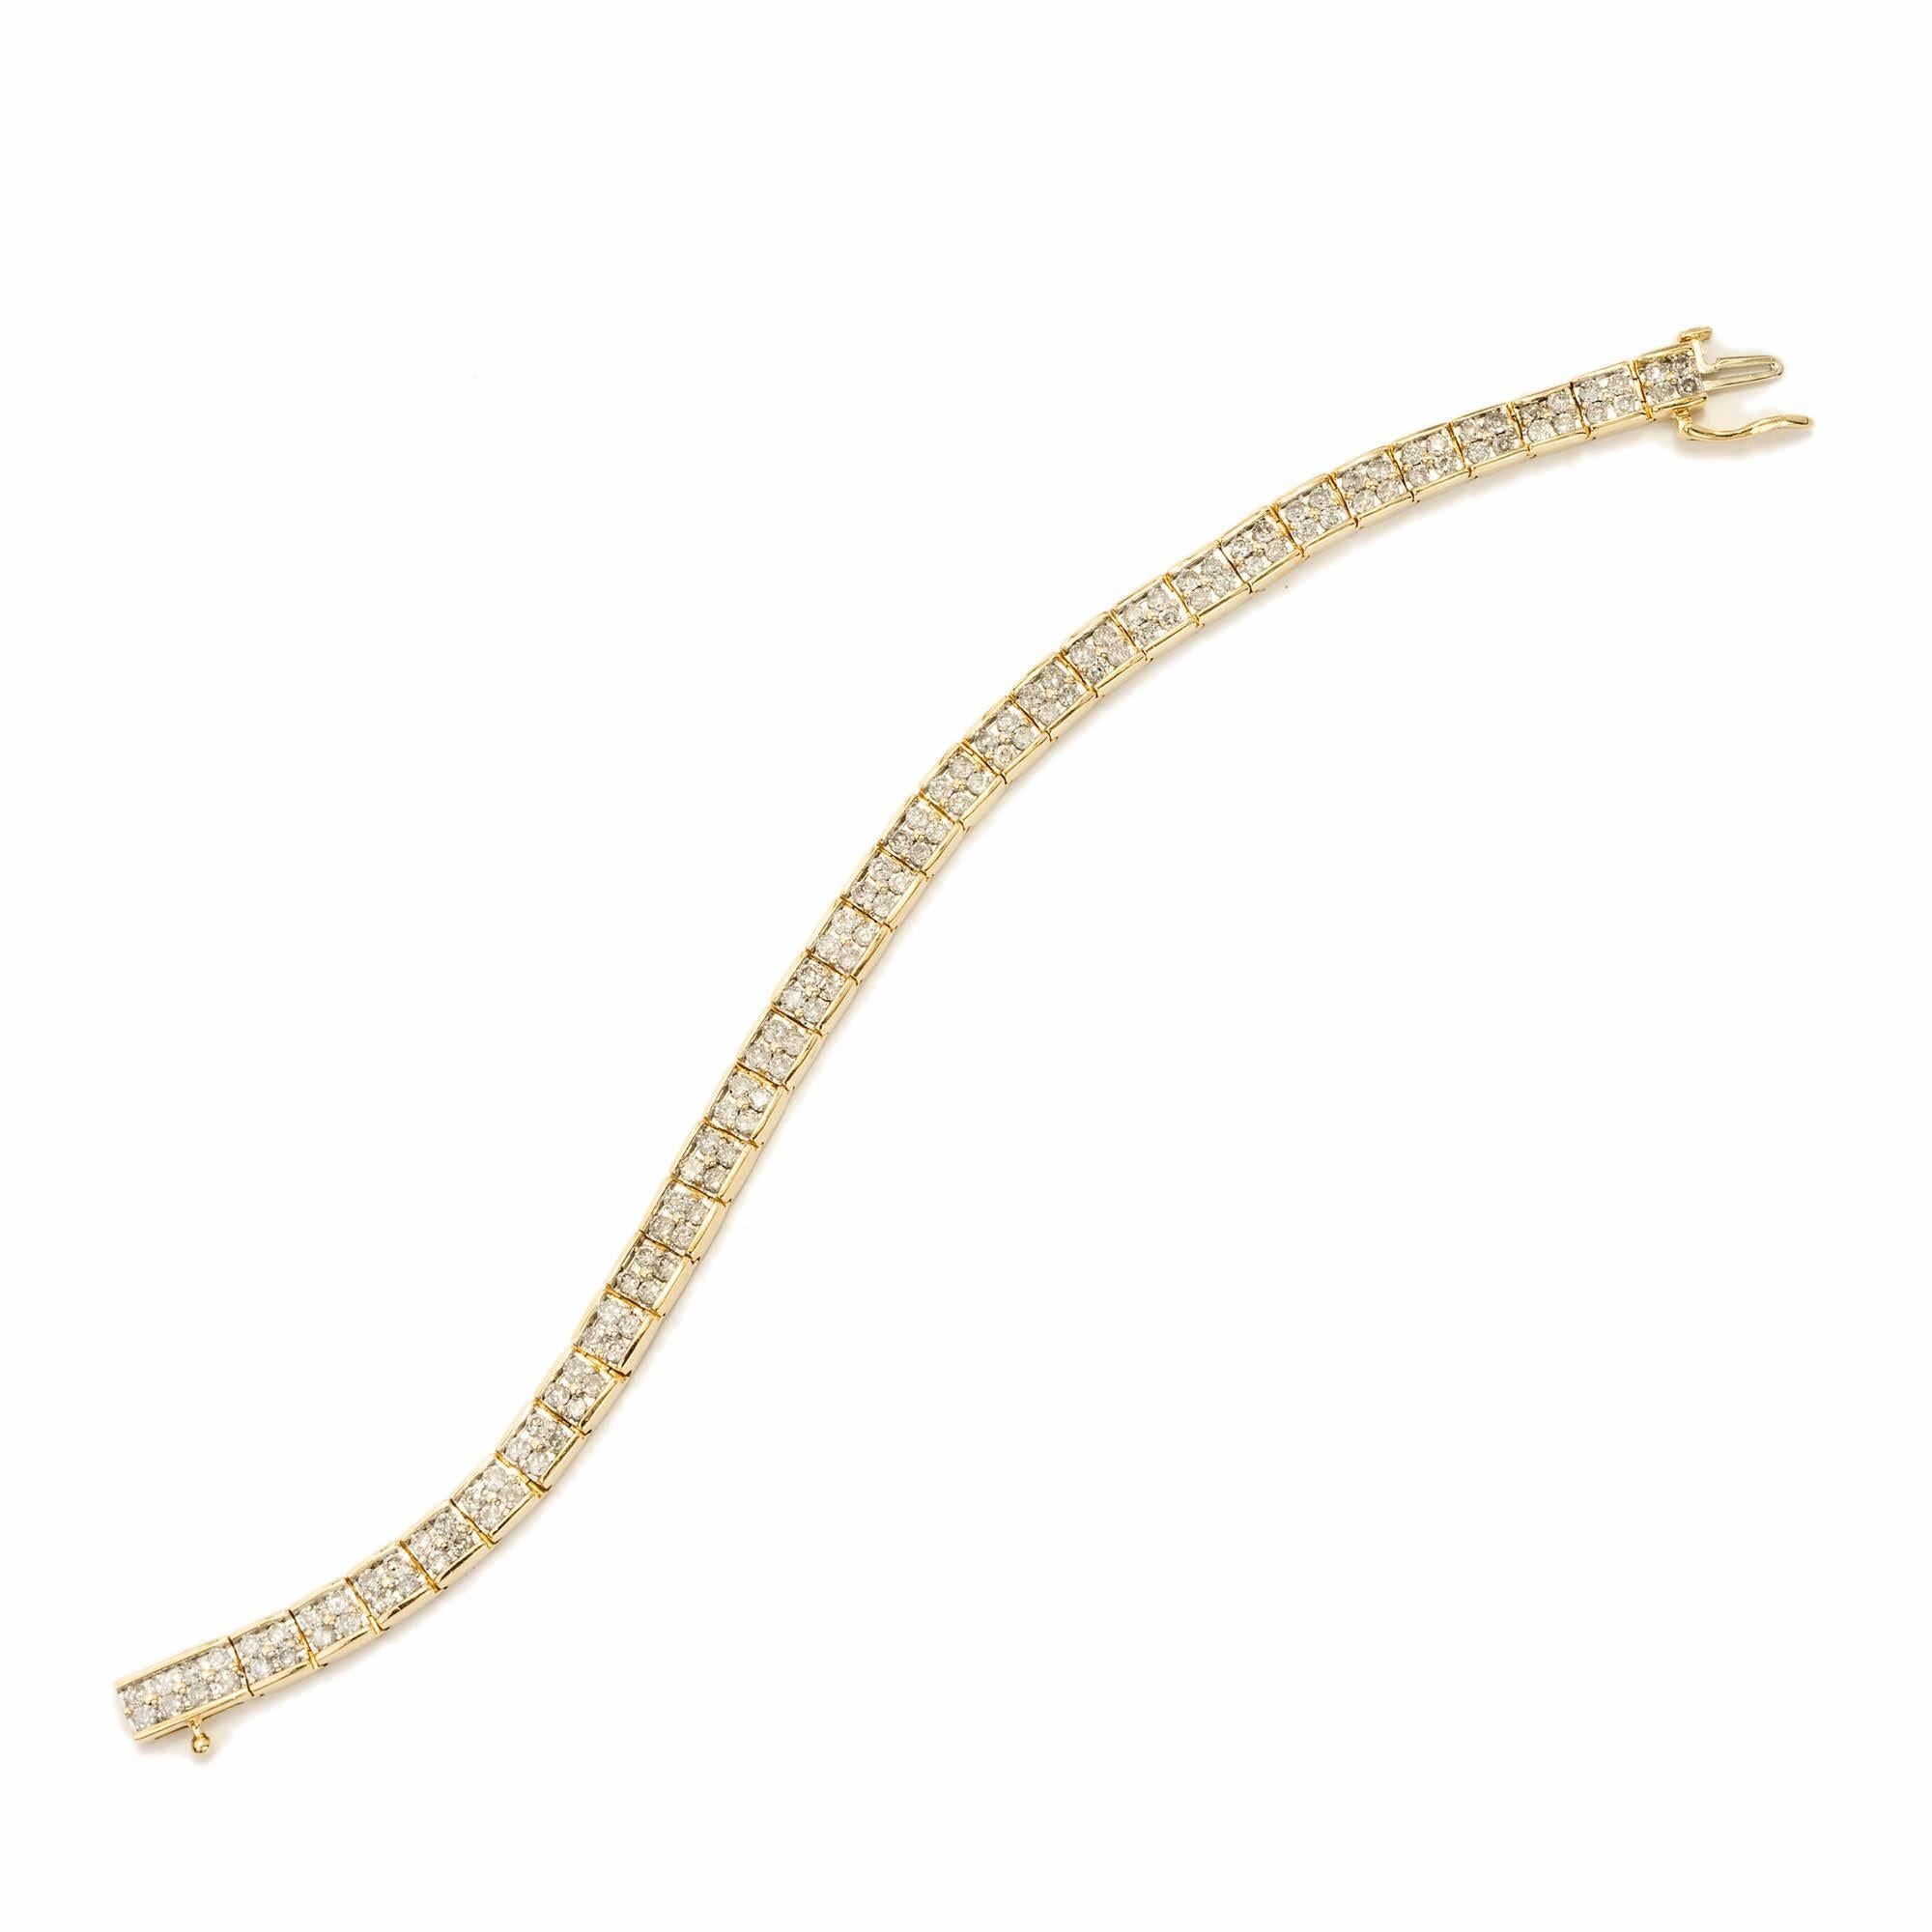 Solid and secure hinged link 14k yellow gold bracelet with hidden catch and side lock safety. 4.00cts of full cut diamonds. 

132 full cut diamond, approx. total weight 4.00cts, J to K, I1
Width: 6mm
Depth: 4mm
Stamped: 14k
 Length: 7 1/2